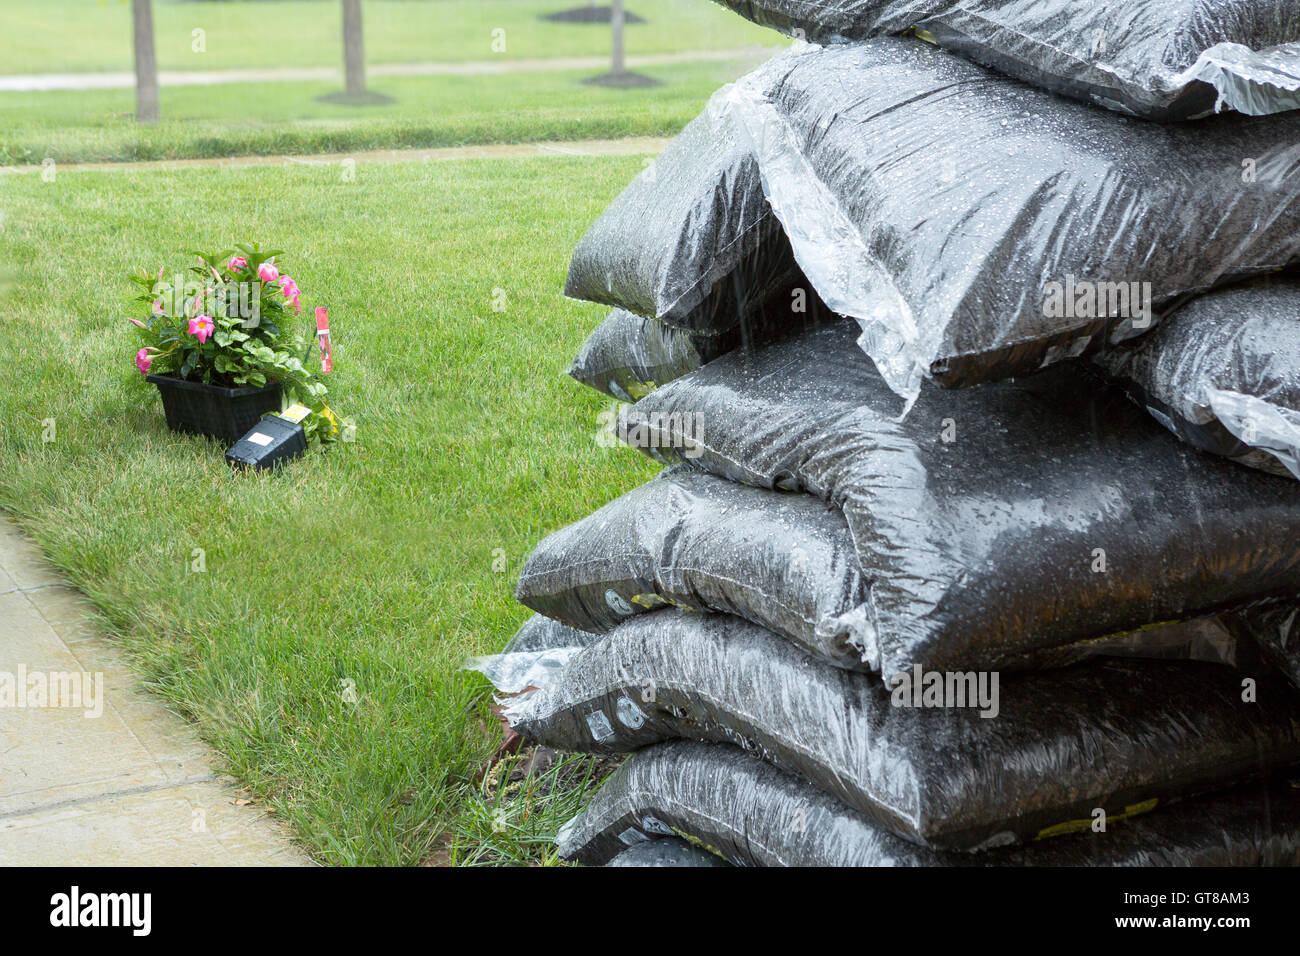 https://c8.alamy.com/comp/GT8AM3/close-up-view-of-stacked-plastic-bags-of-commercial-organic-mulch-GT8AM3.jpg